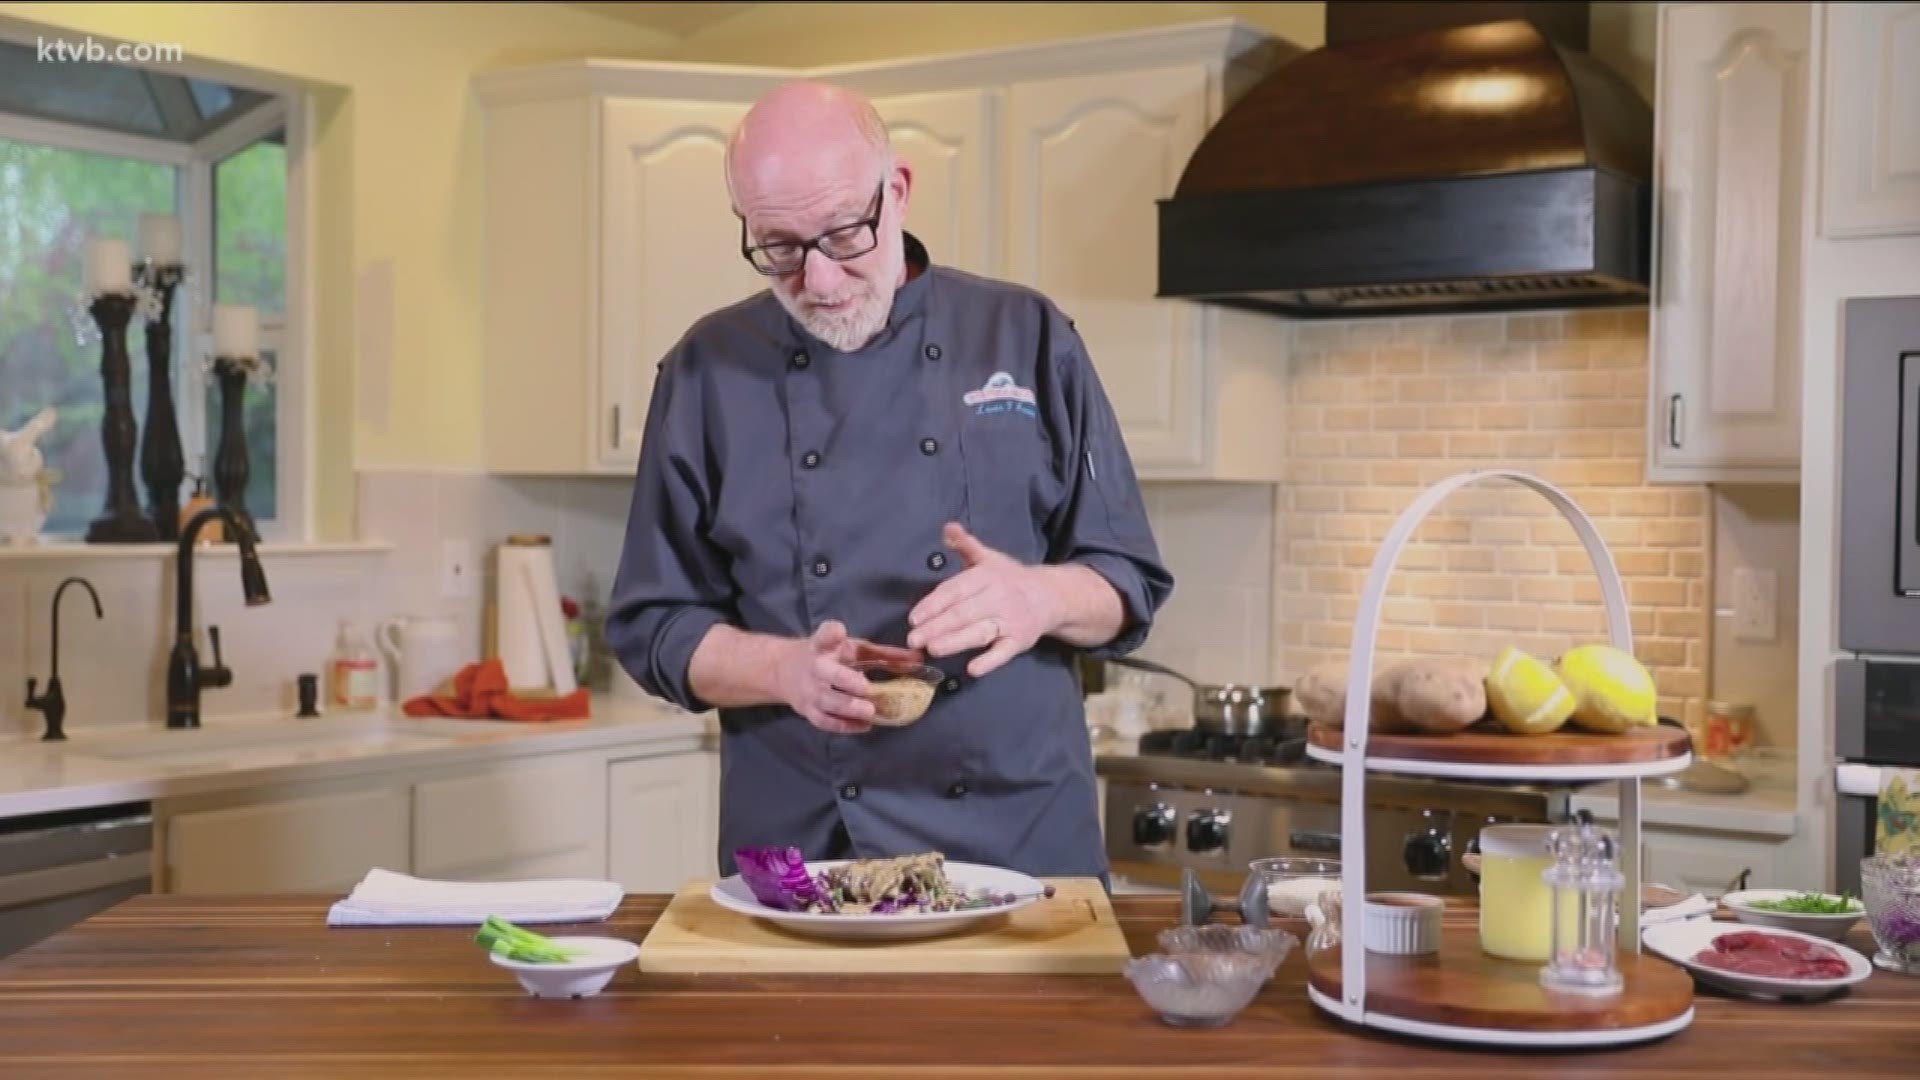 Chef Lou recreates a long-time favorite dish from his own kitchen after years of cooking in the KTVB kitchen.